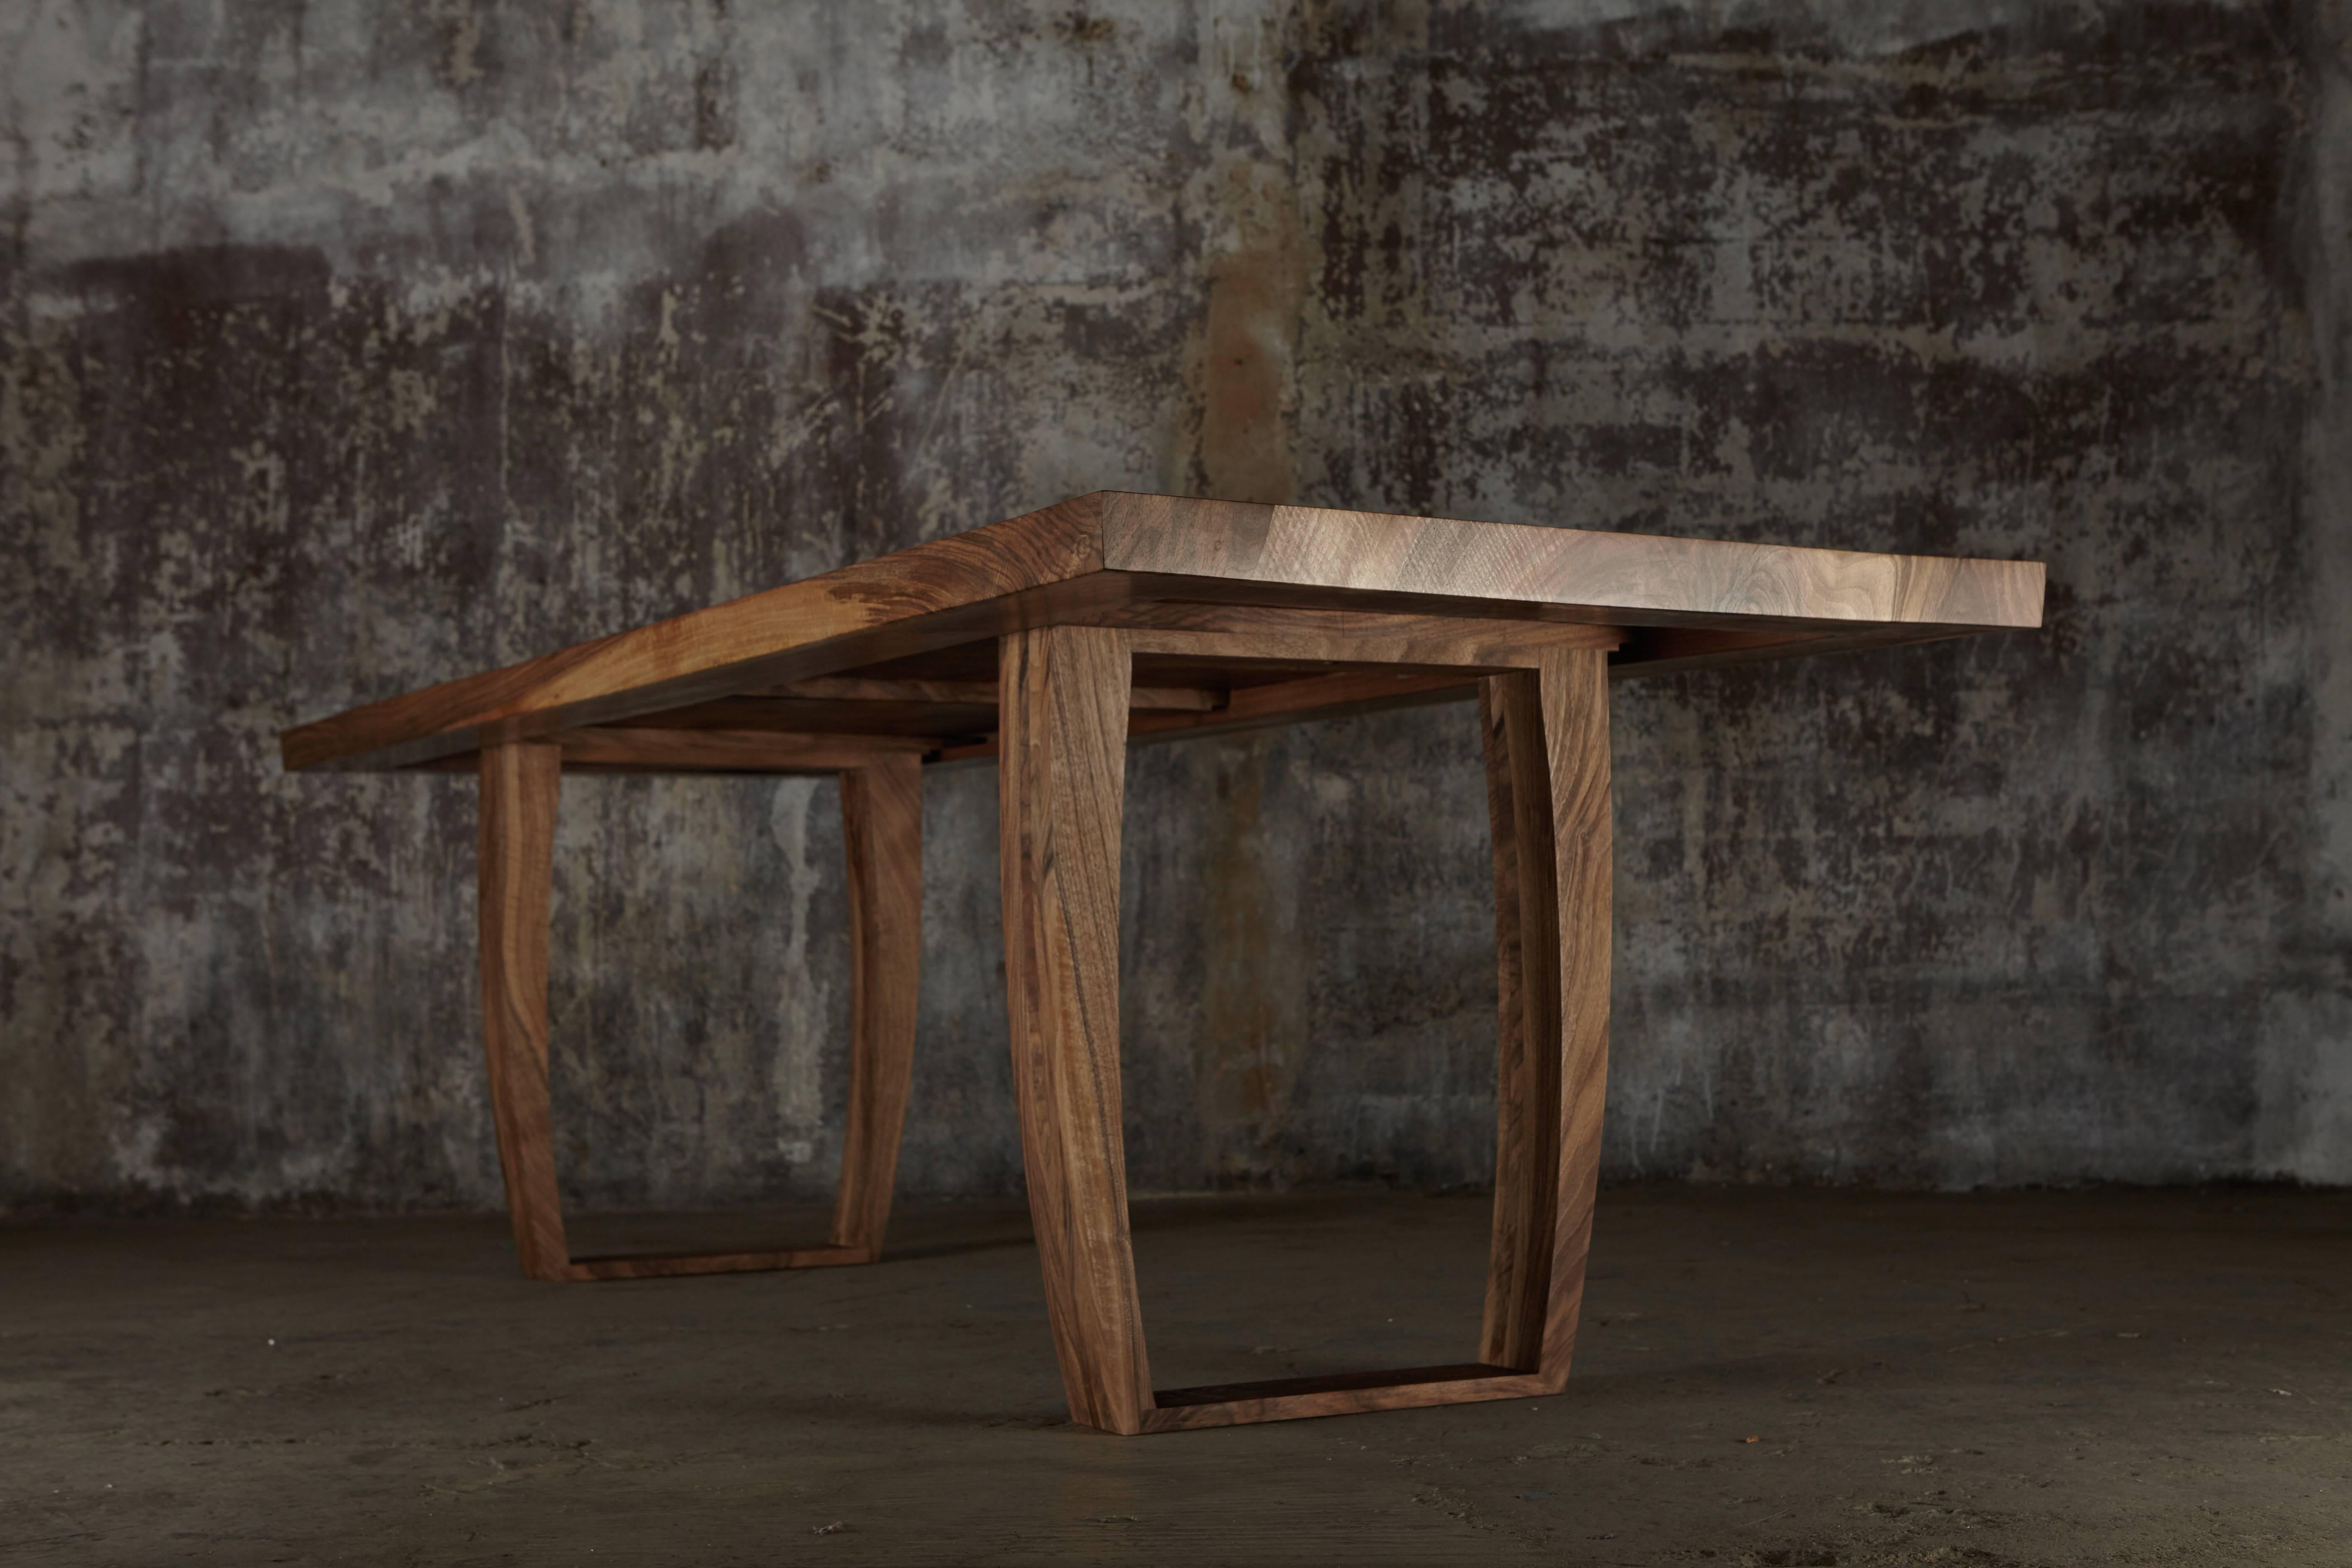 Ripple walnut dining table with inset live edge. Bespoke sizes by Jonathan Field 2